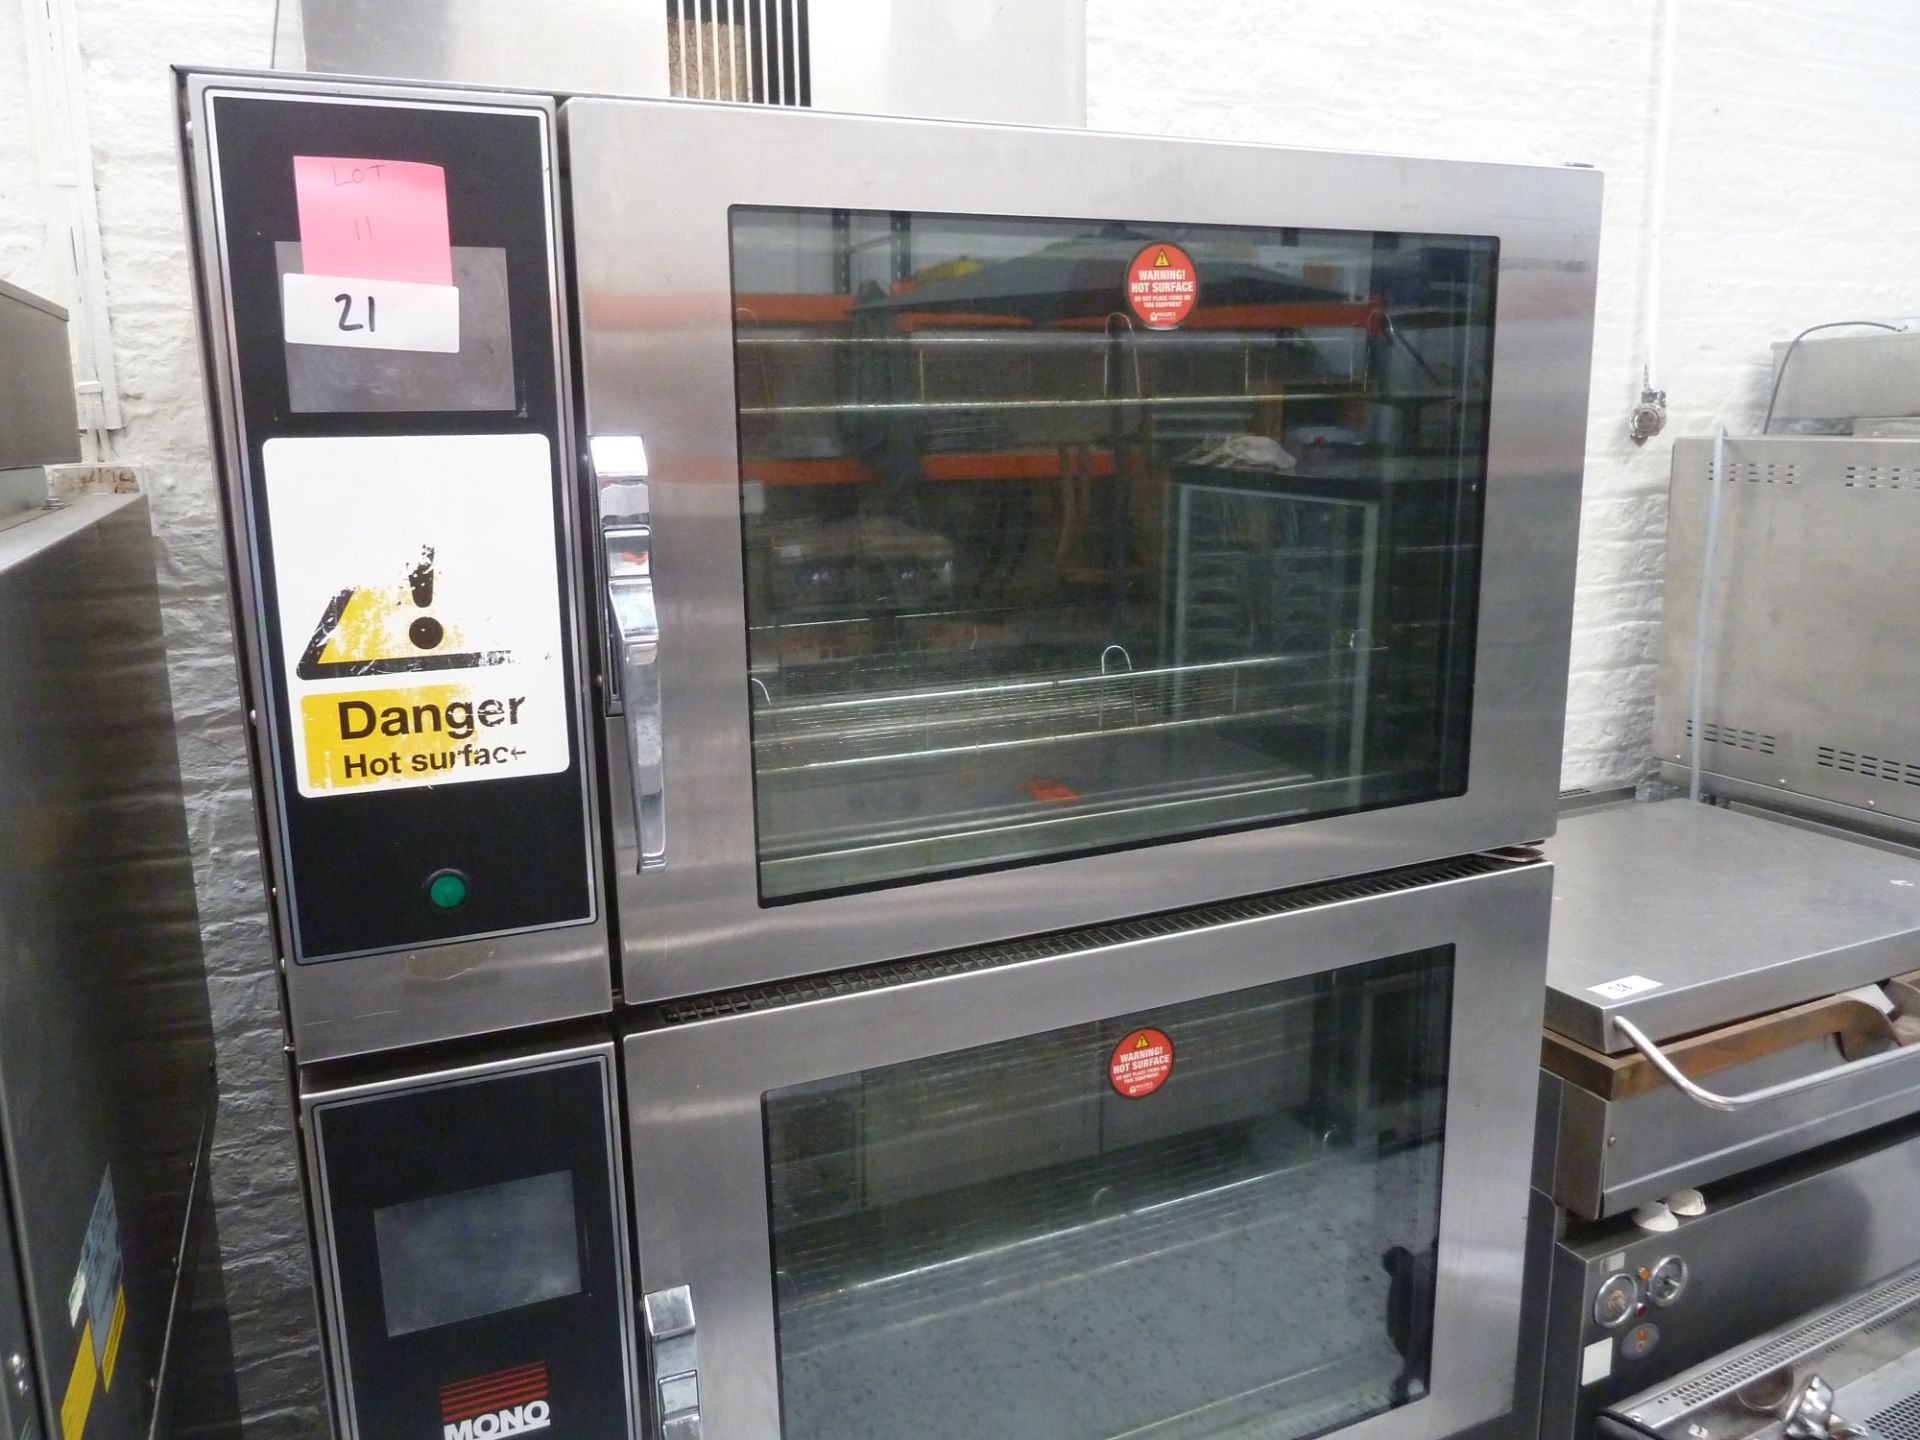 * Double BX Mono bakery oven, includes stand and shelving, very clean.(1000Wx2000Hx900D)